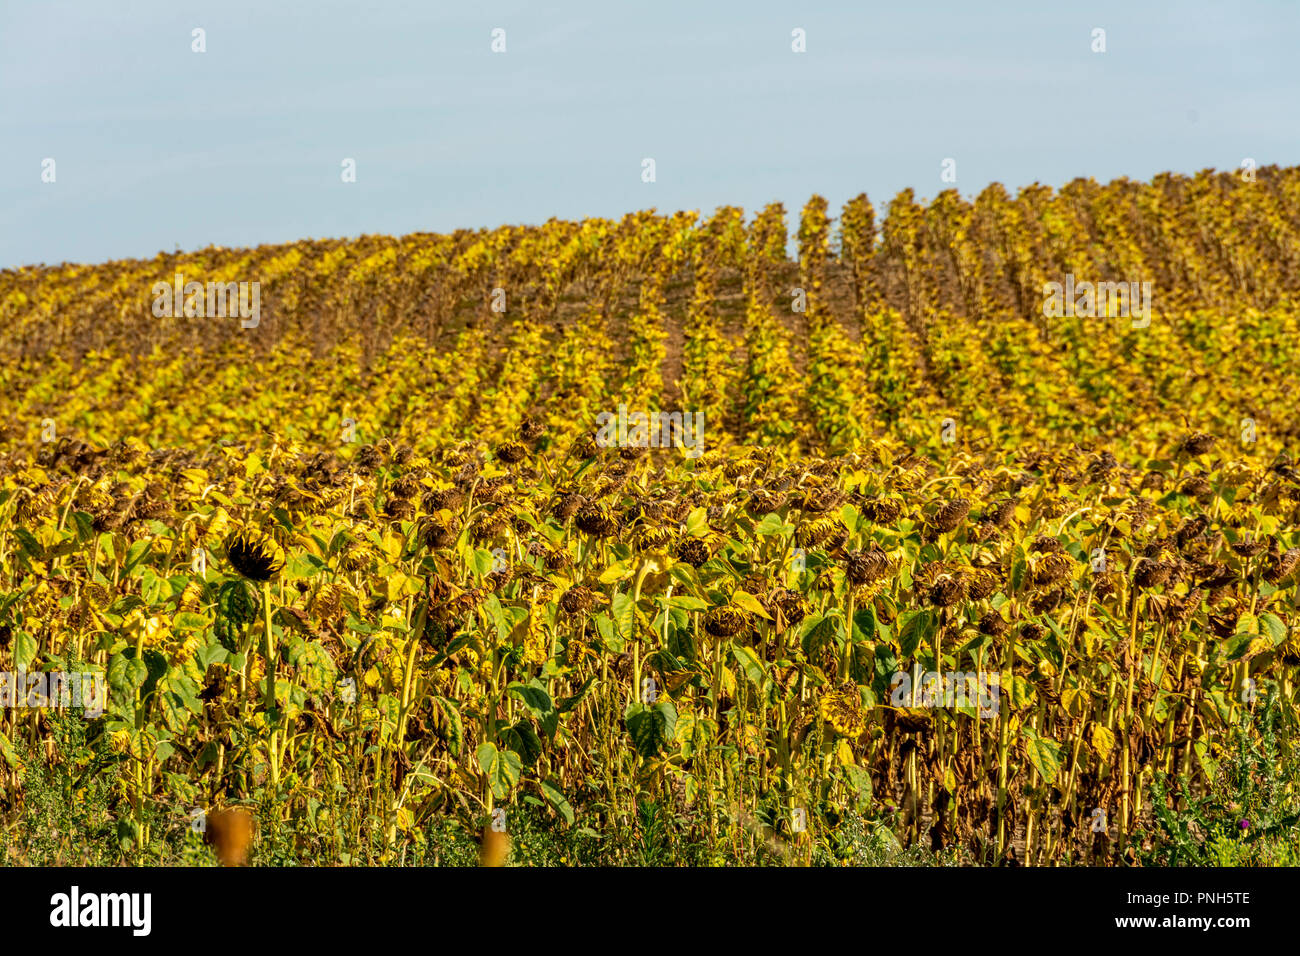 Dried up sunflowers field in Limagne, Puy de Dome, Auvergne Rhone Alpes, France Stock Photo